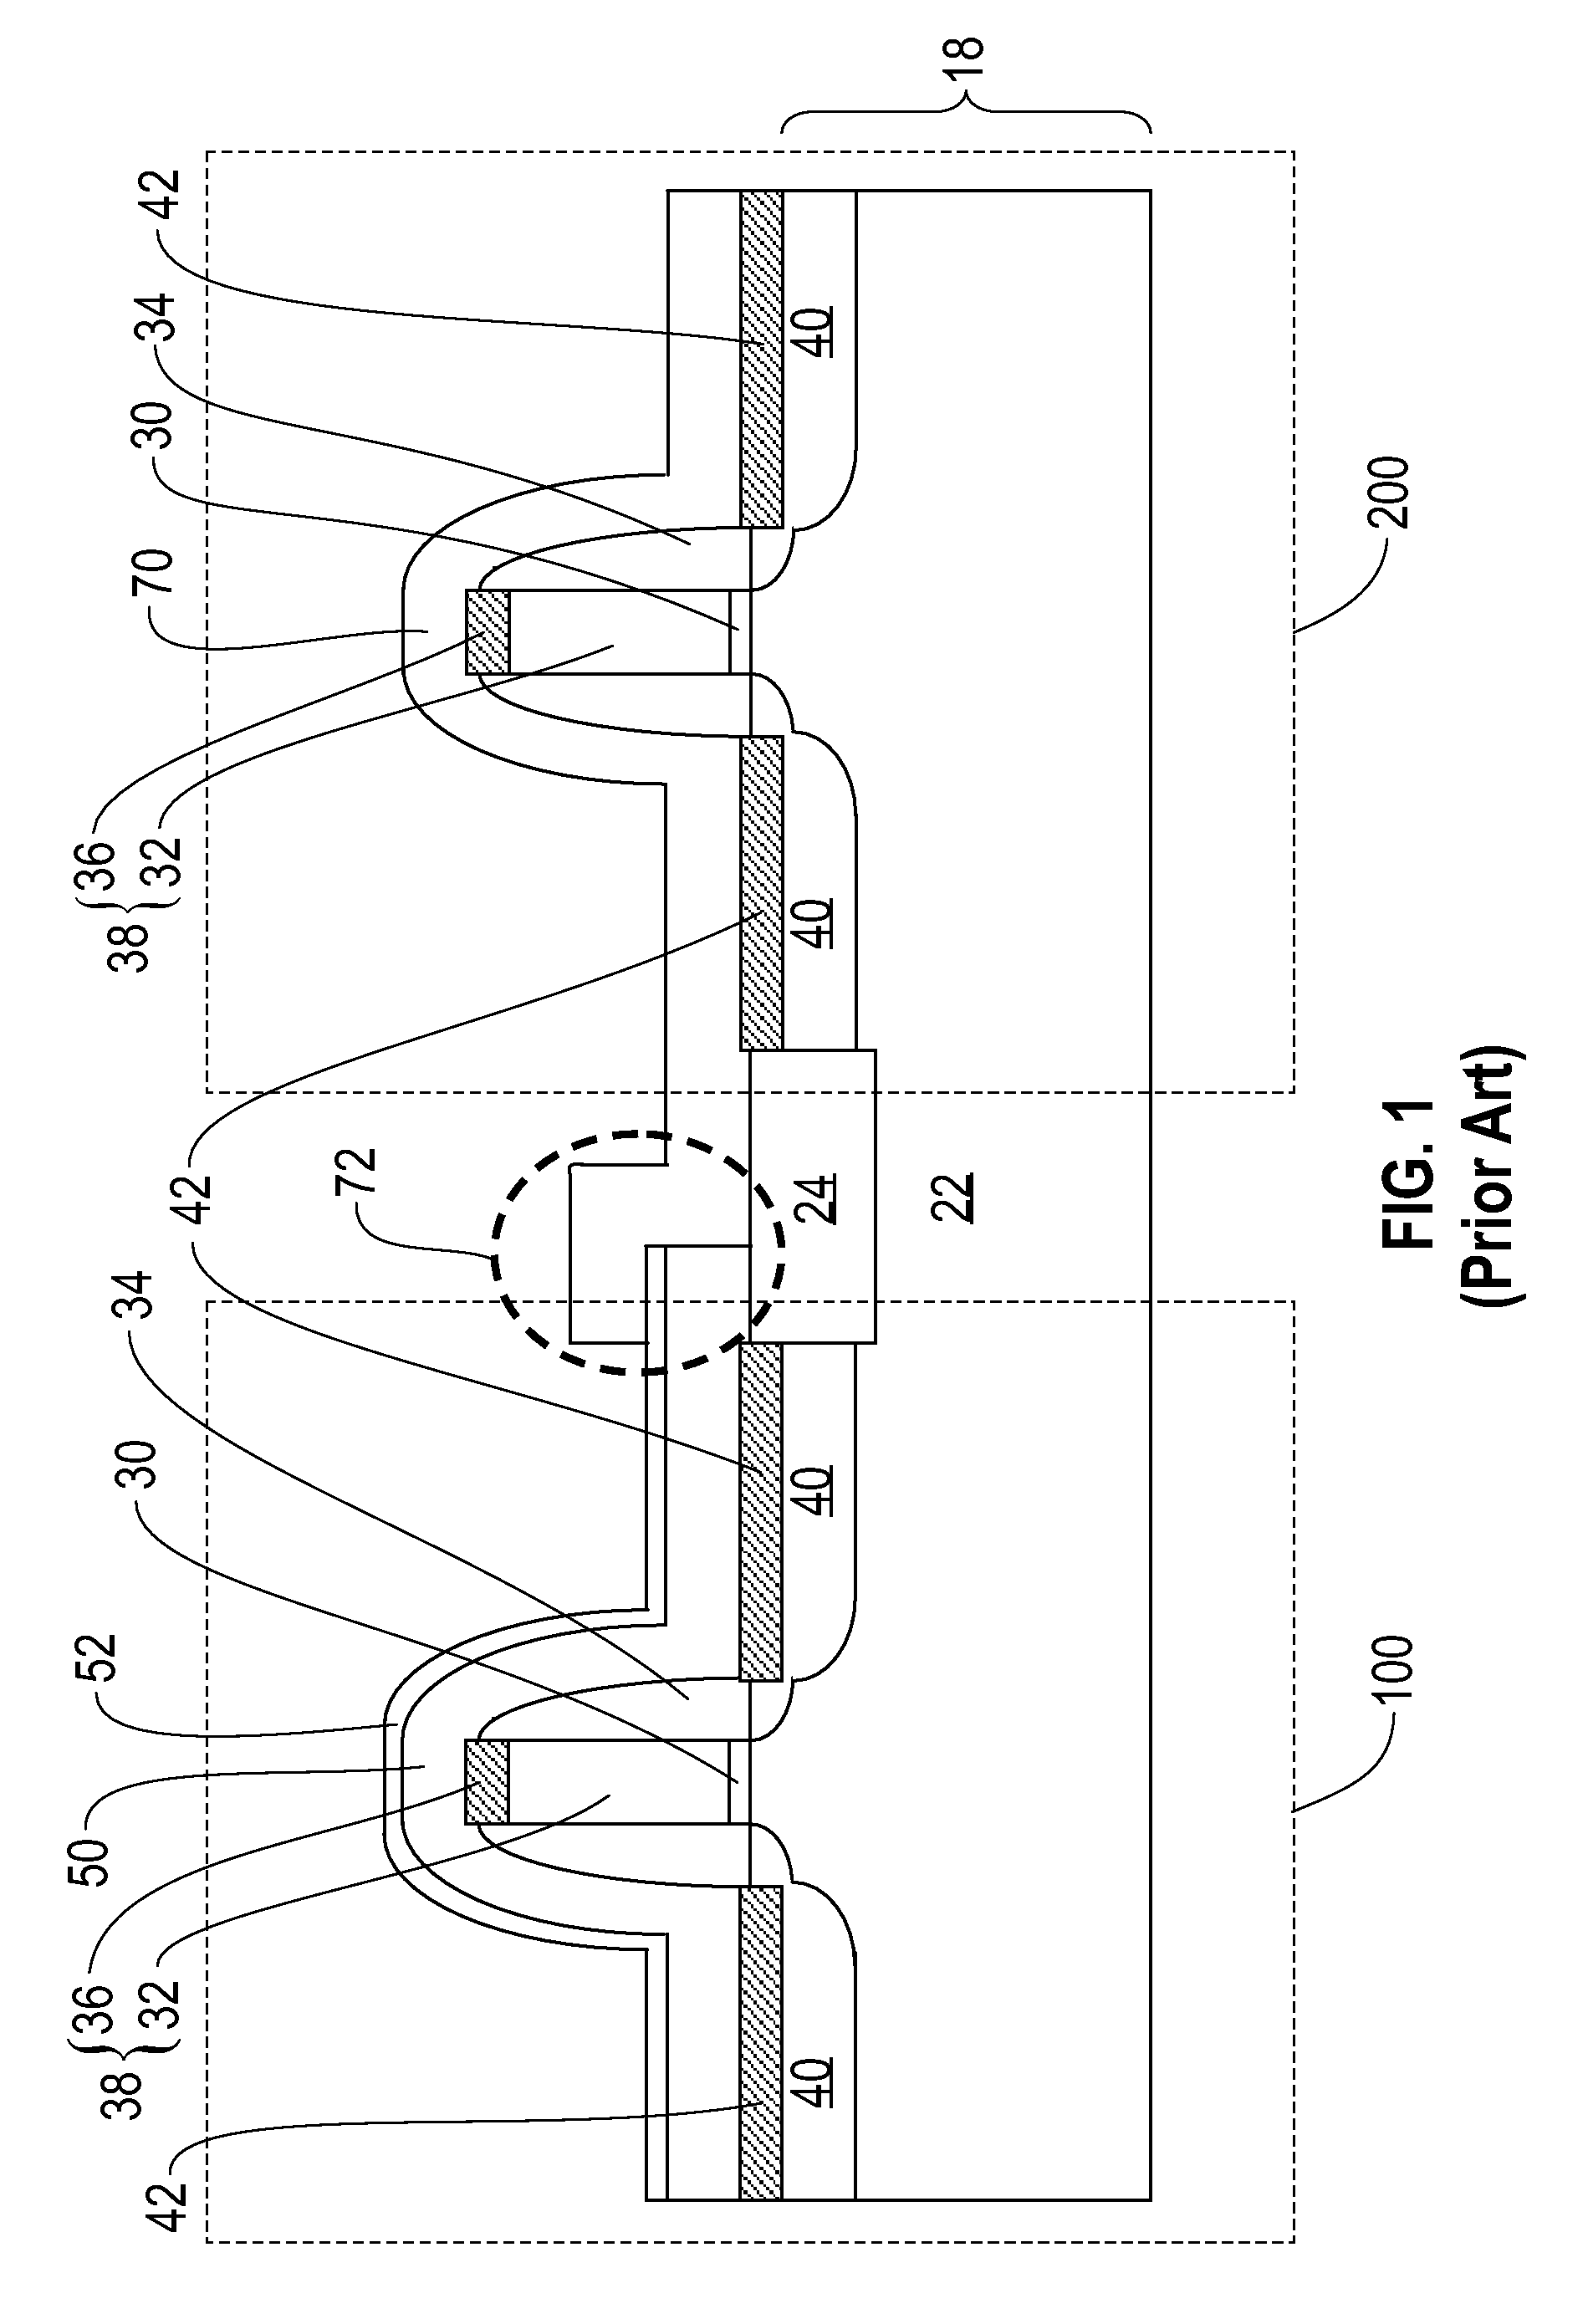 Orientation-optimized PFETS in CMOS devices employing dual stress liners